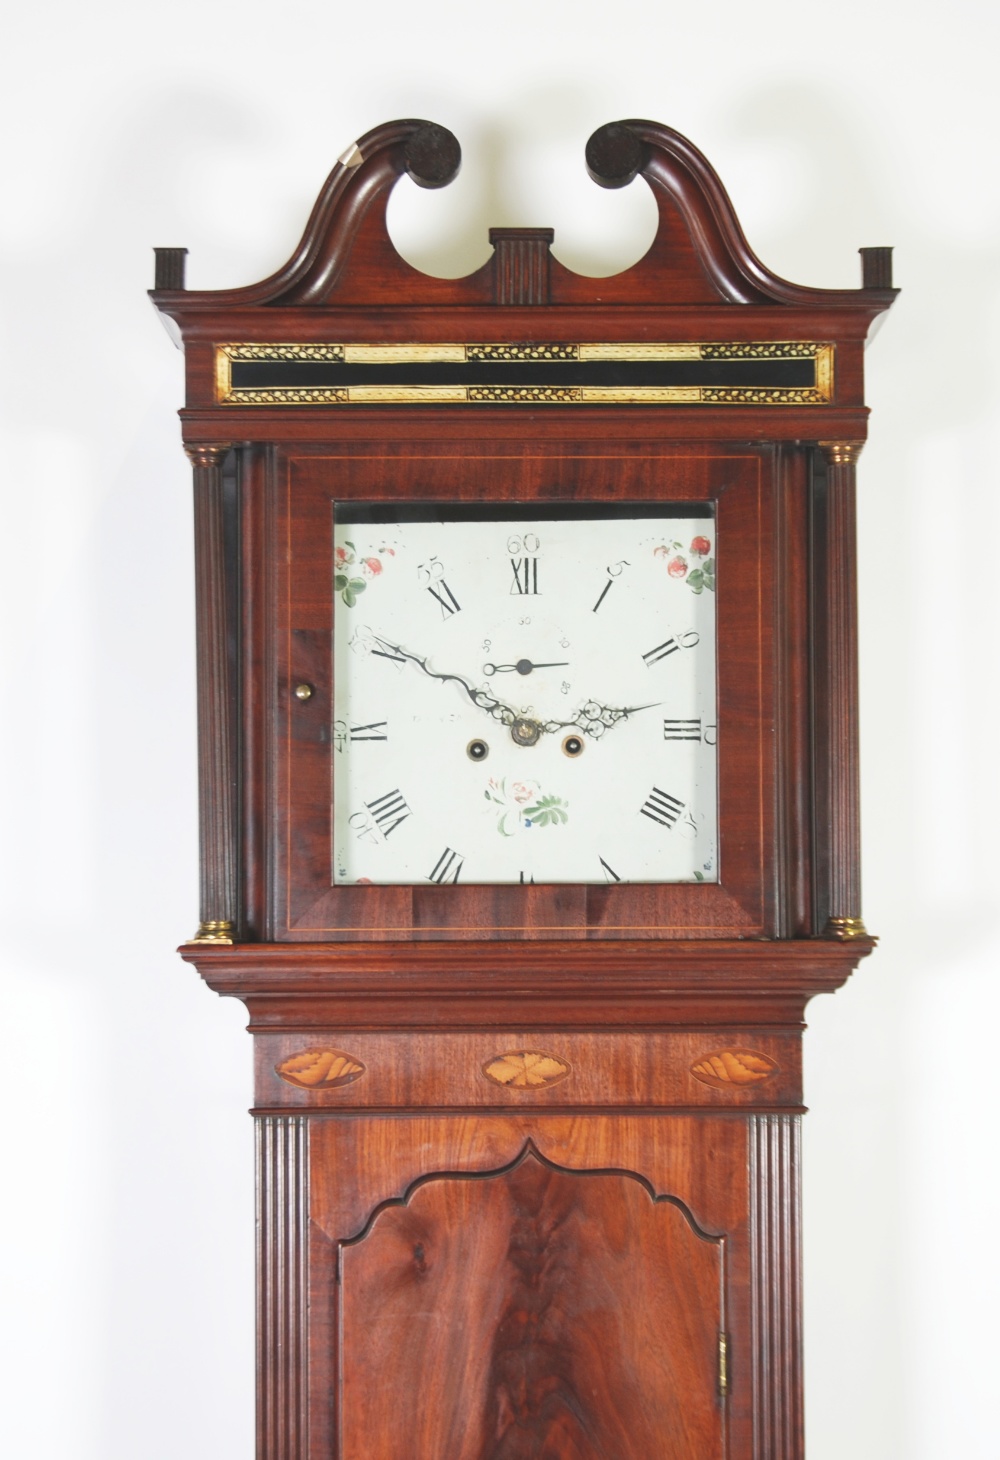 LATE EIGHTEENTH CENTURY MARQUETRY AND LINE INLAID MAHOGANY LONGCASE CLOCK, the 13 1/4" painted